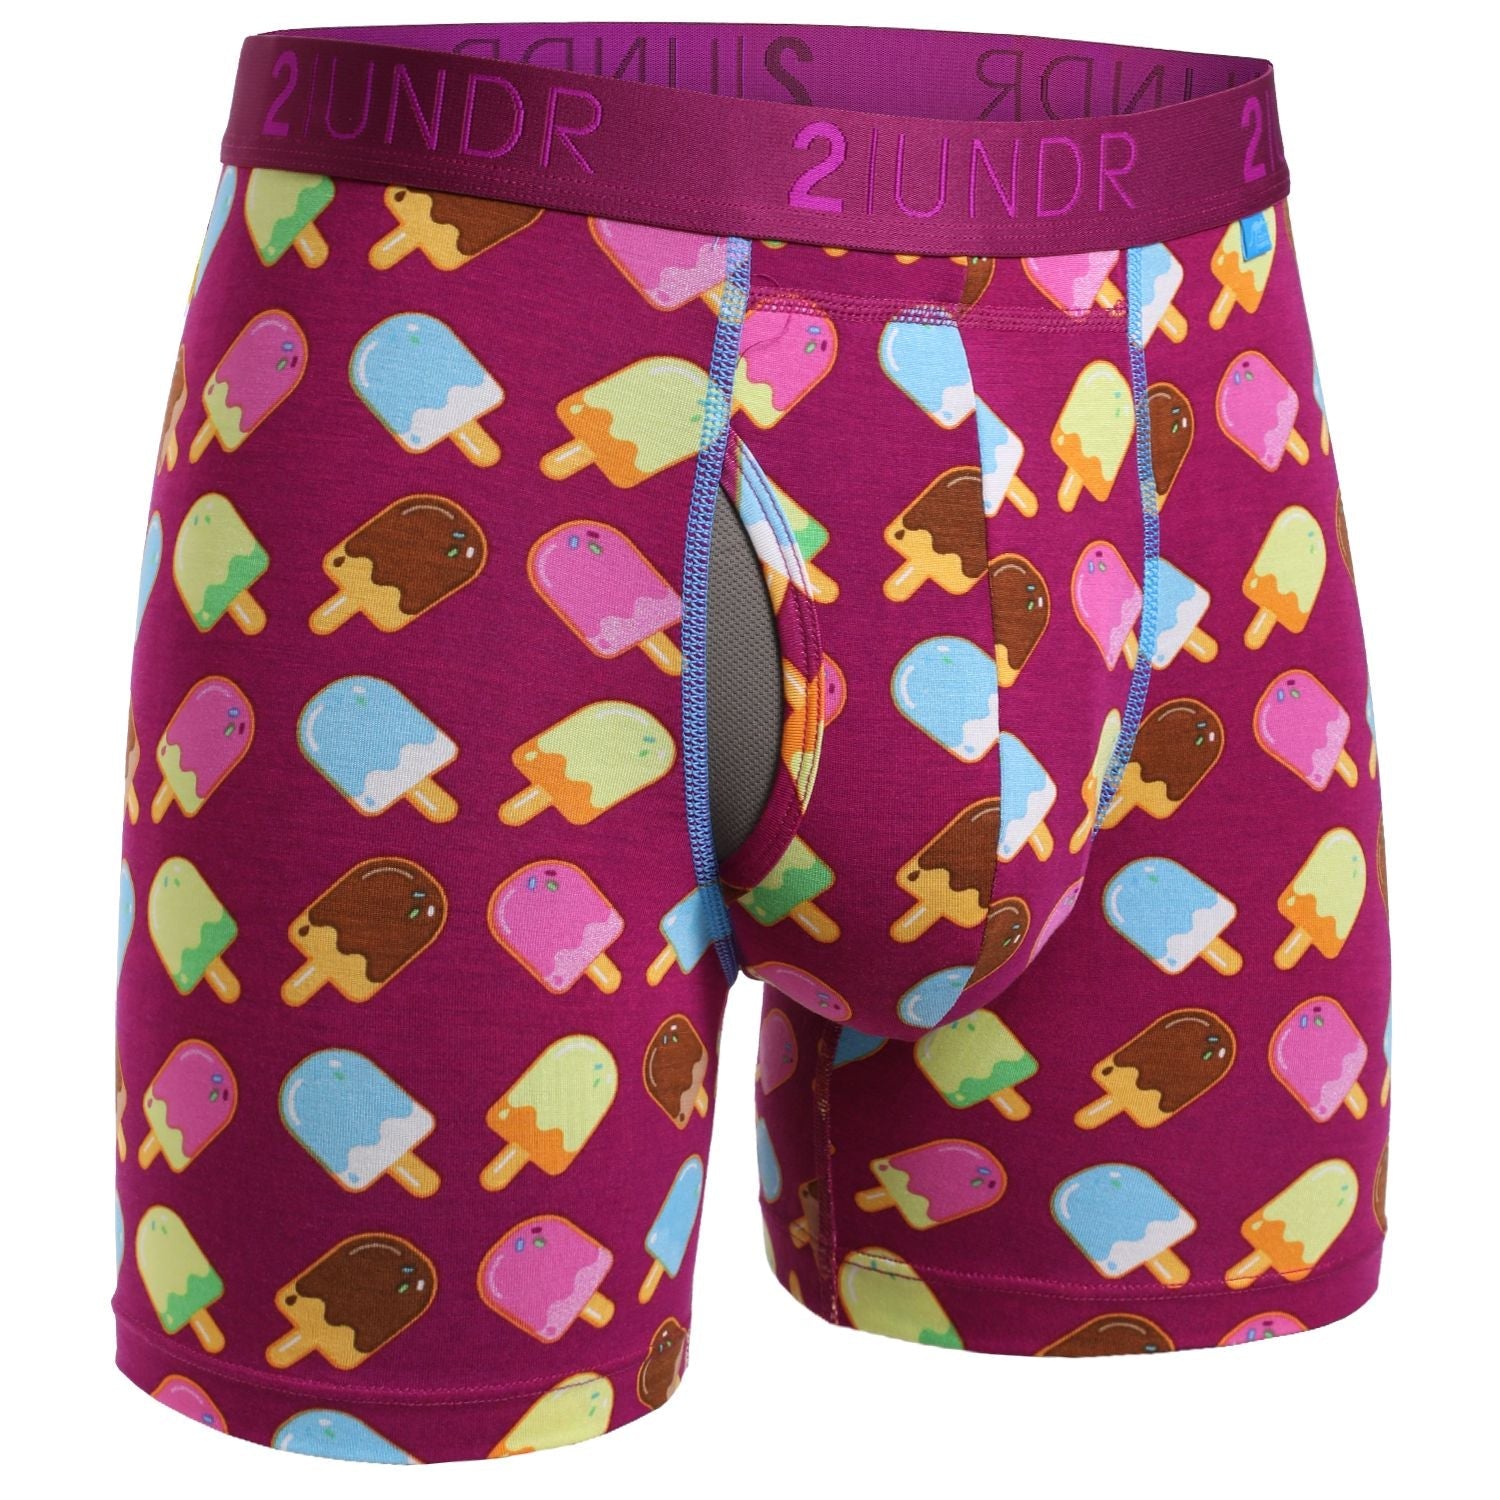 2Undr Swing Shift Boxer Brief Prints - Creamsicles - My Filosophy